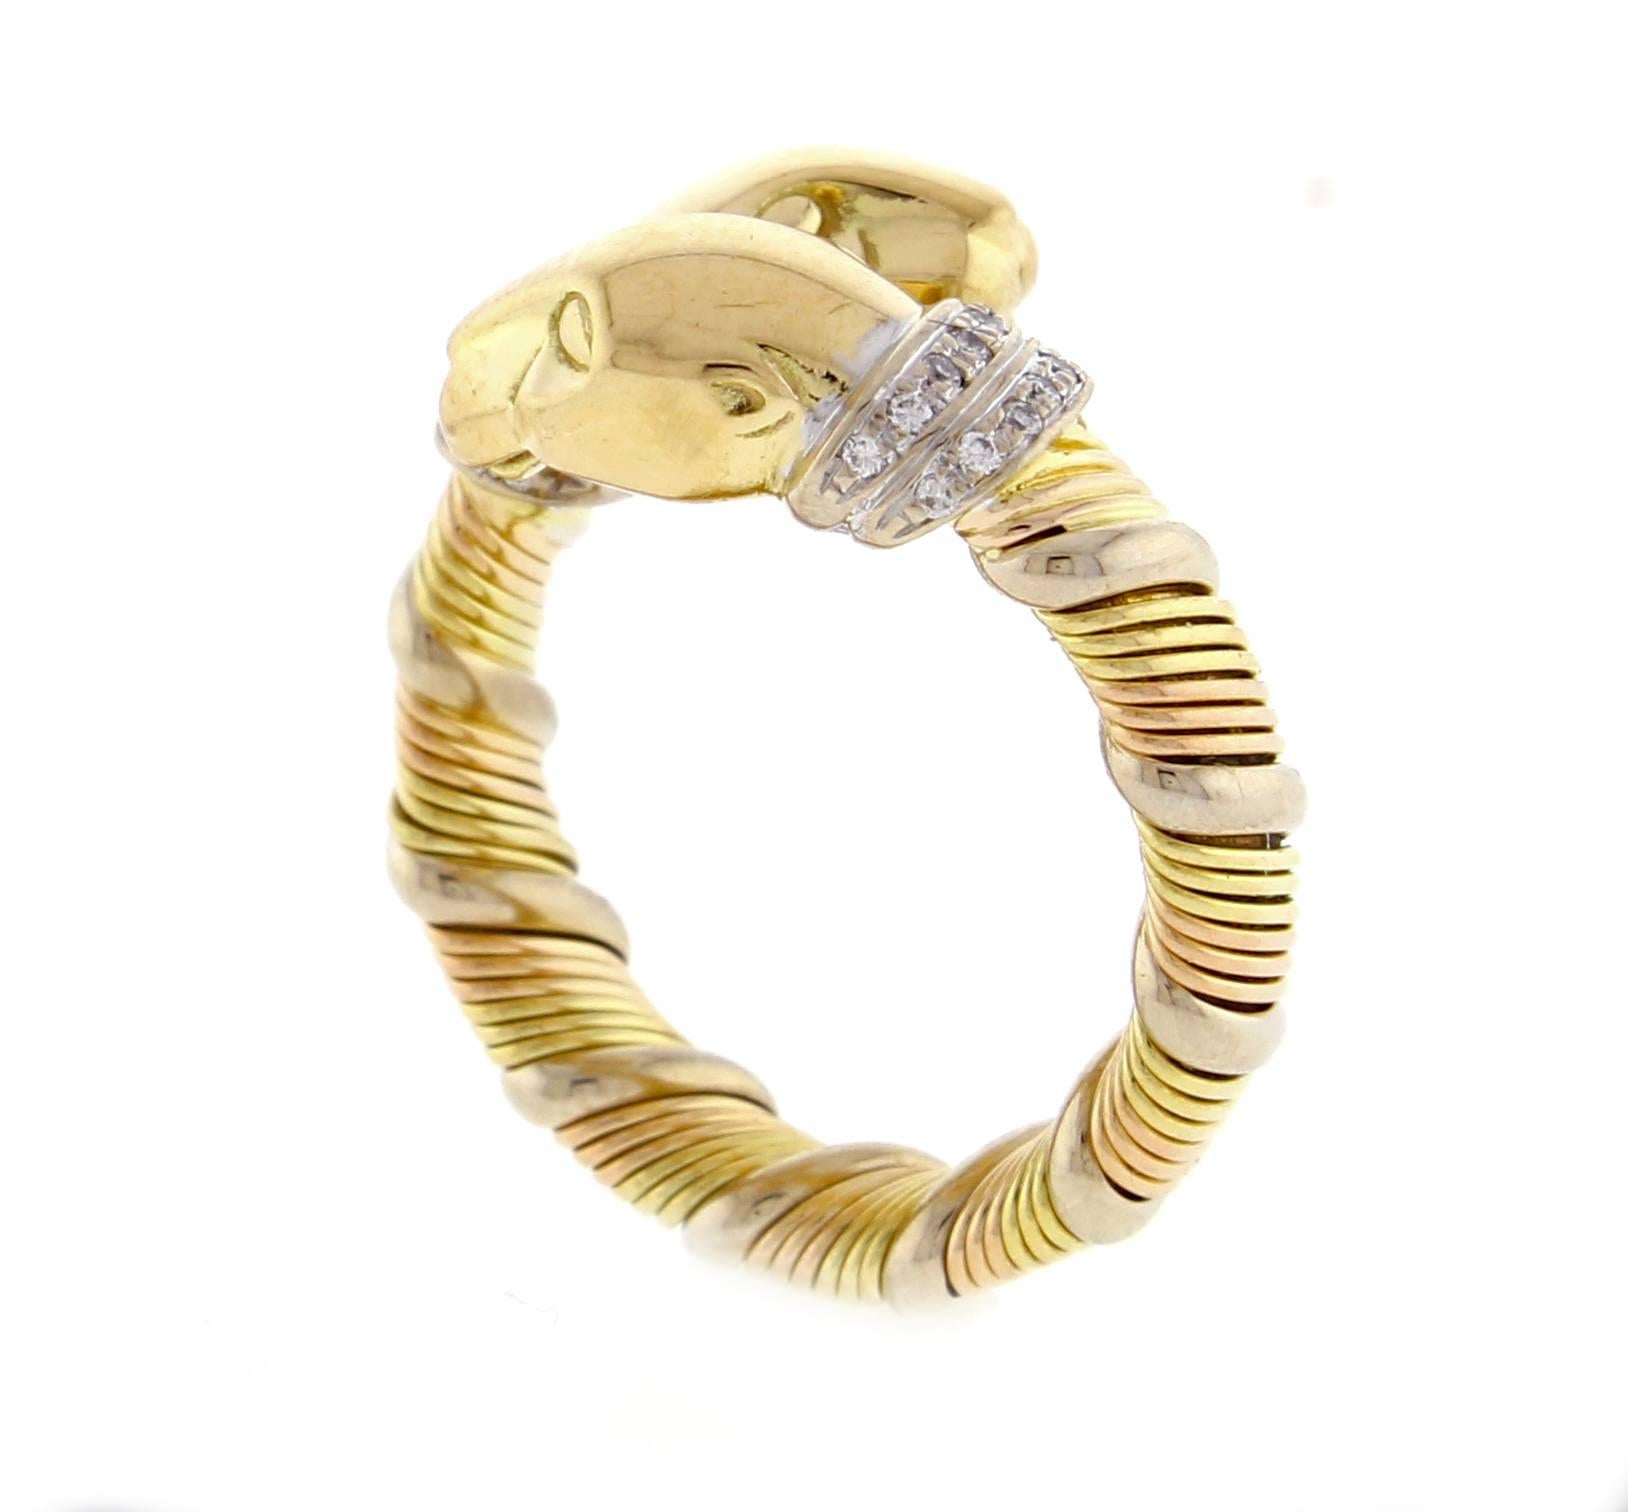 Women's or Men's Cartier White, Yellow and Pink 18 Karat Gold Double Panthere Diamond Band Ring